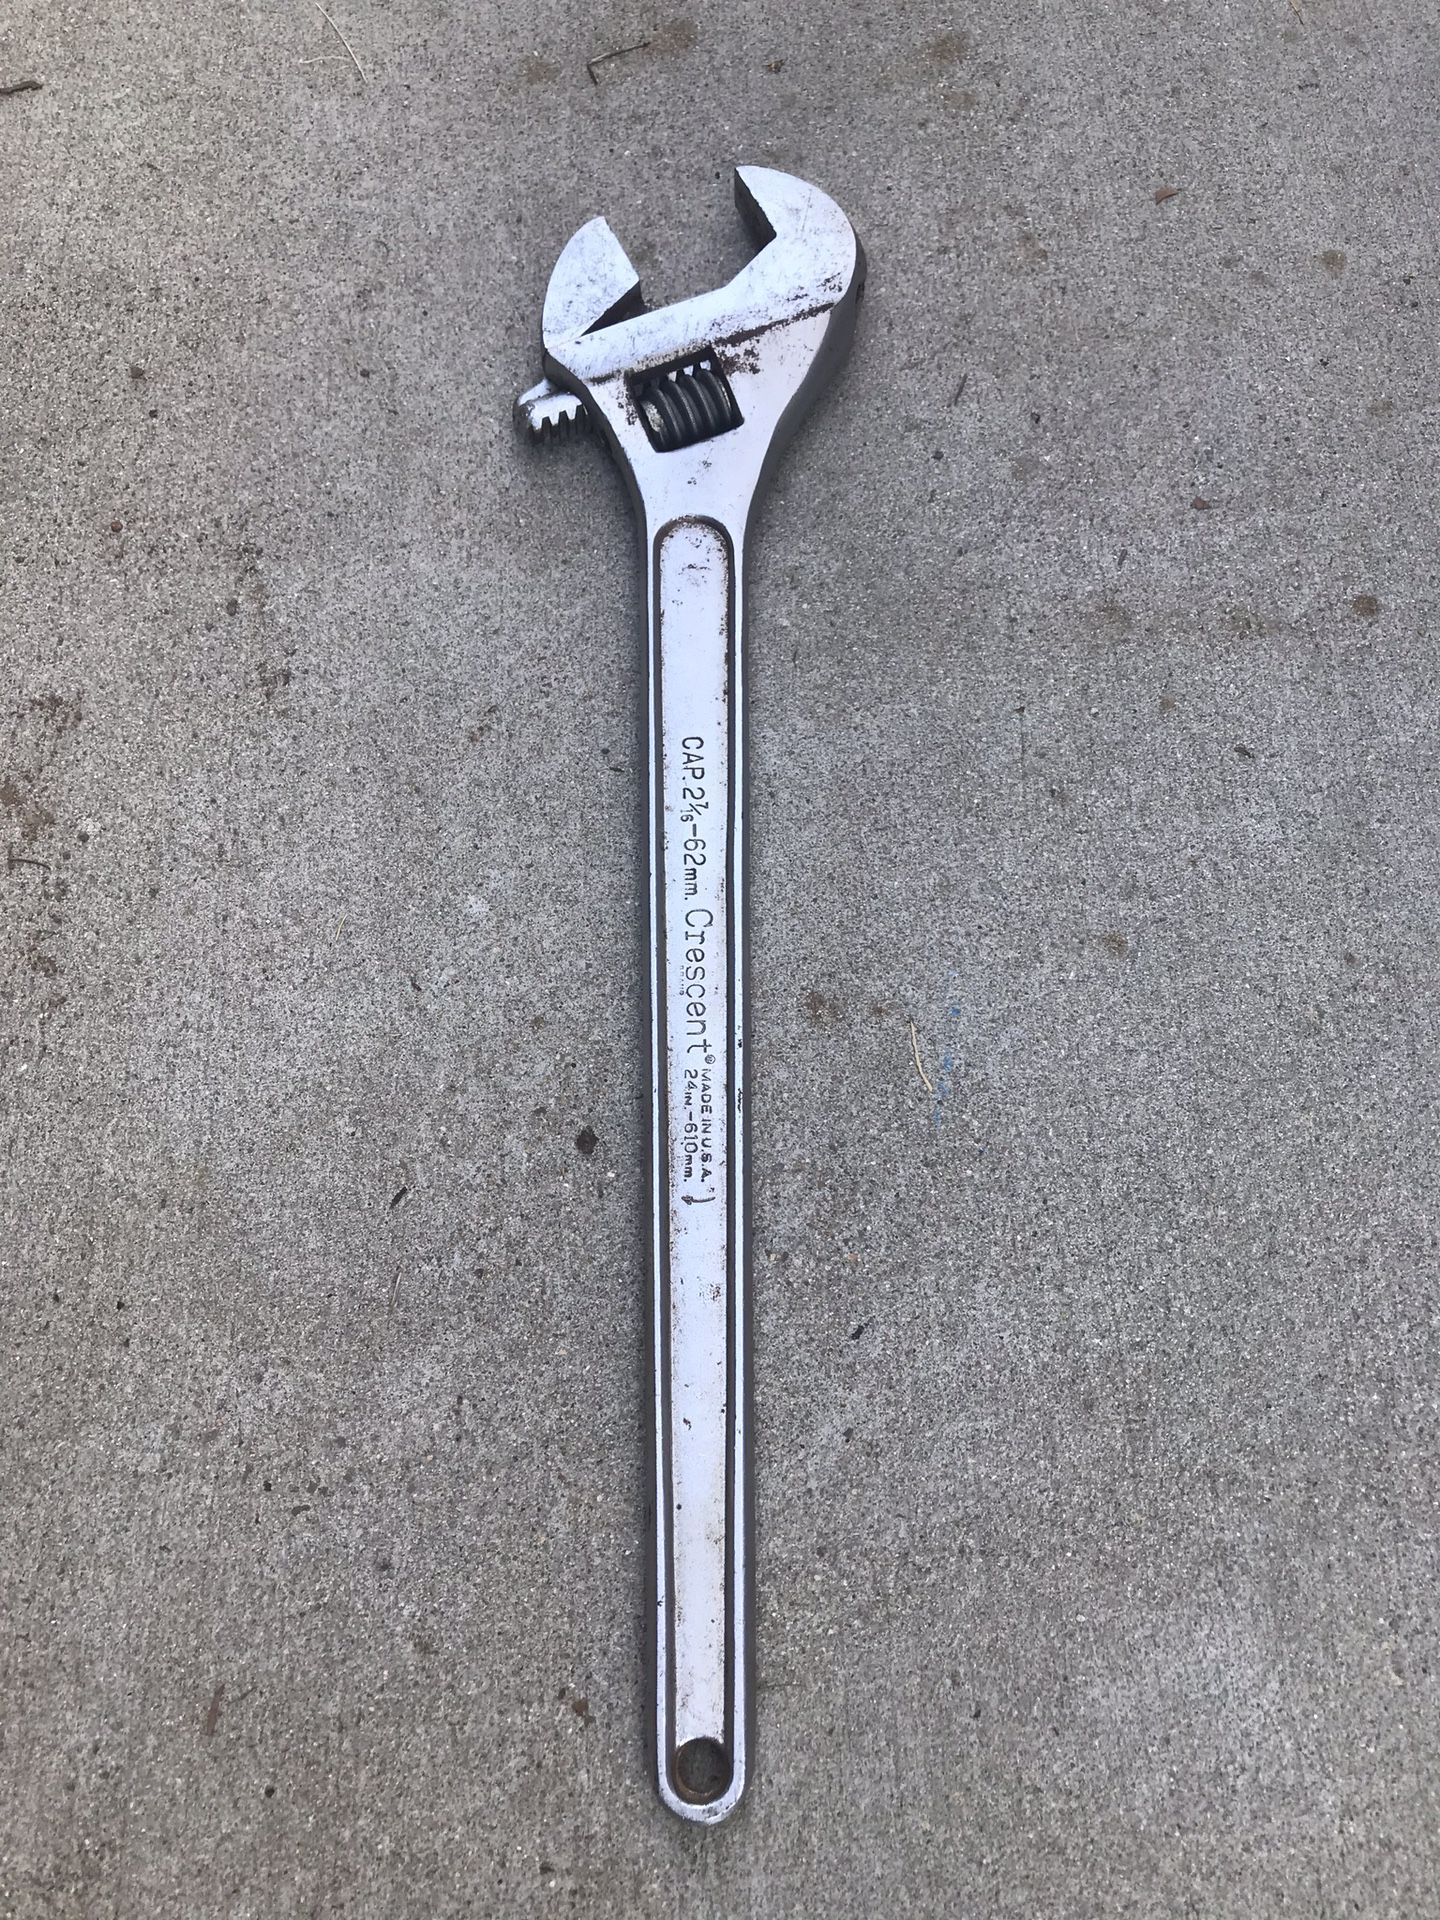 24 in. Adjustable crescent wrench.